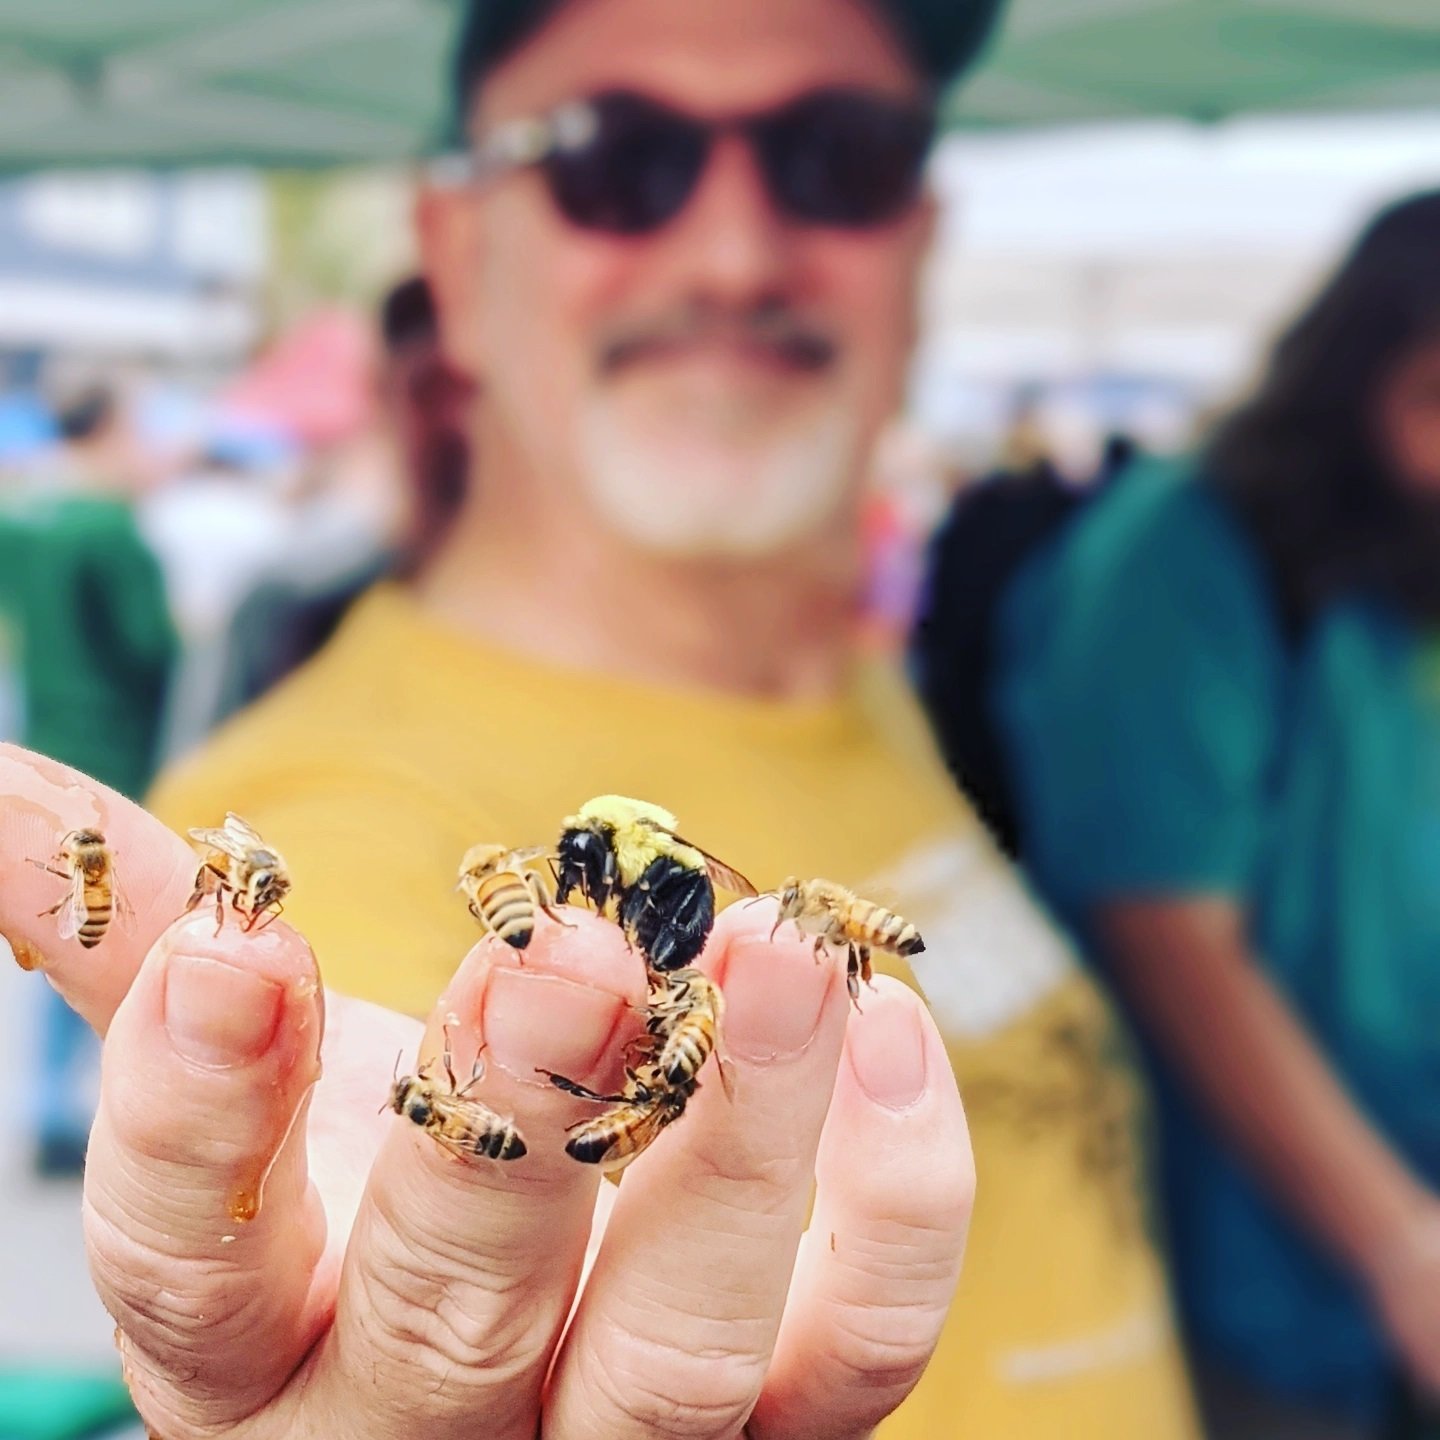 Bees in the hand are worth... a lot in terms of education. Here, SUNY Sullivan professor Art Riegar holds out some bees for the camera's perusal.